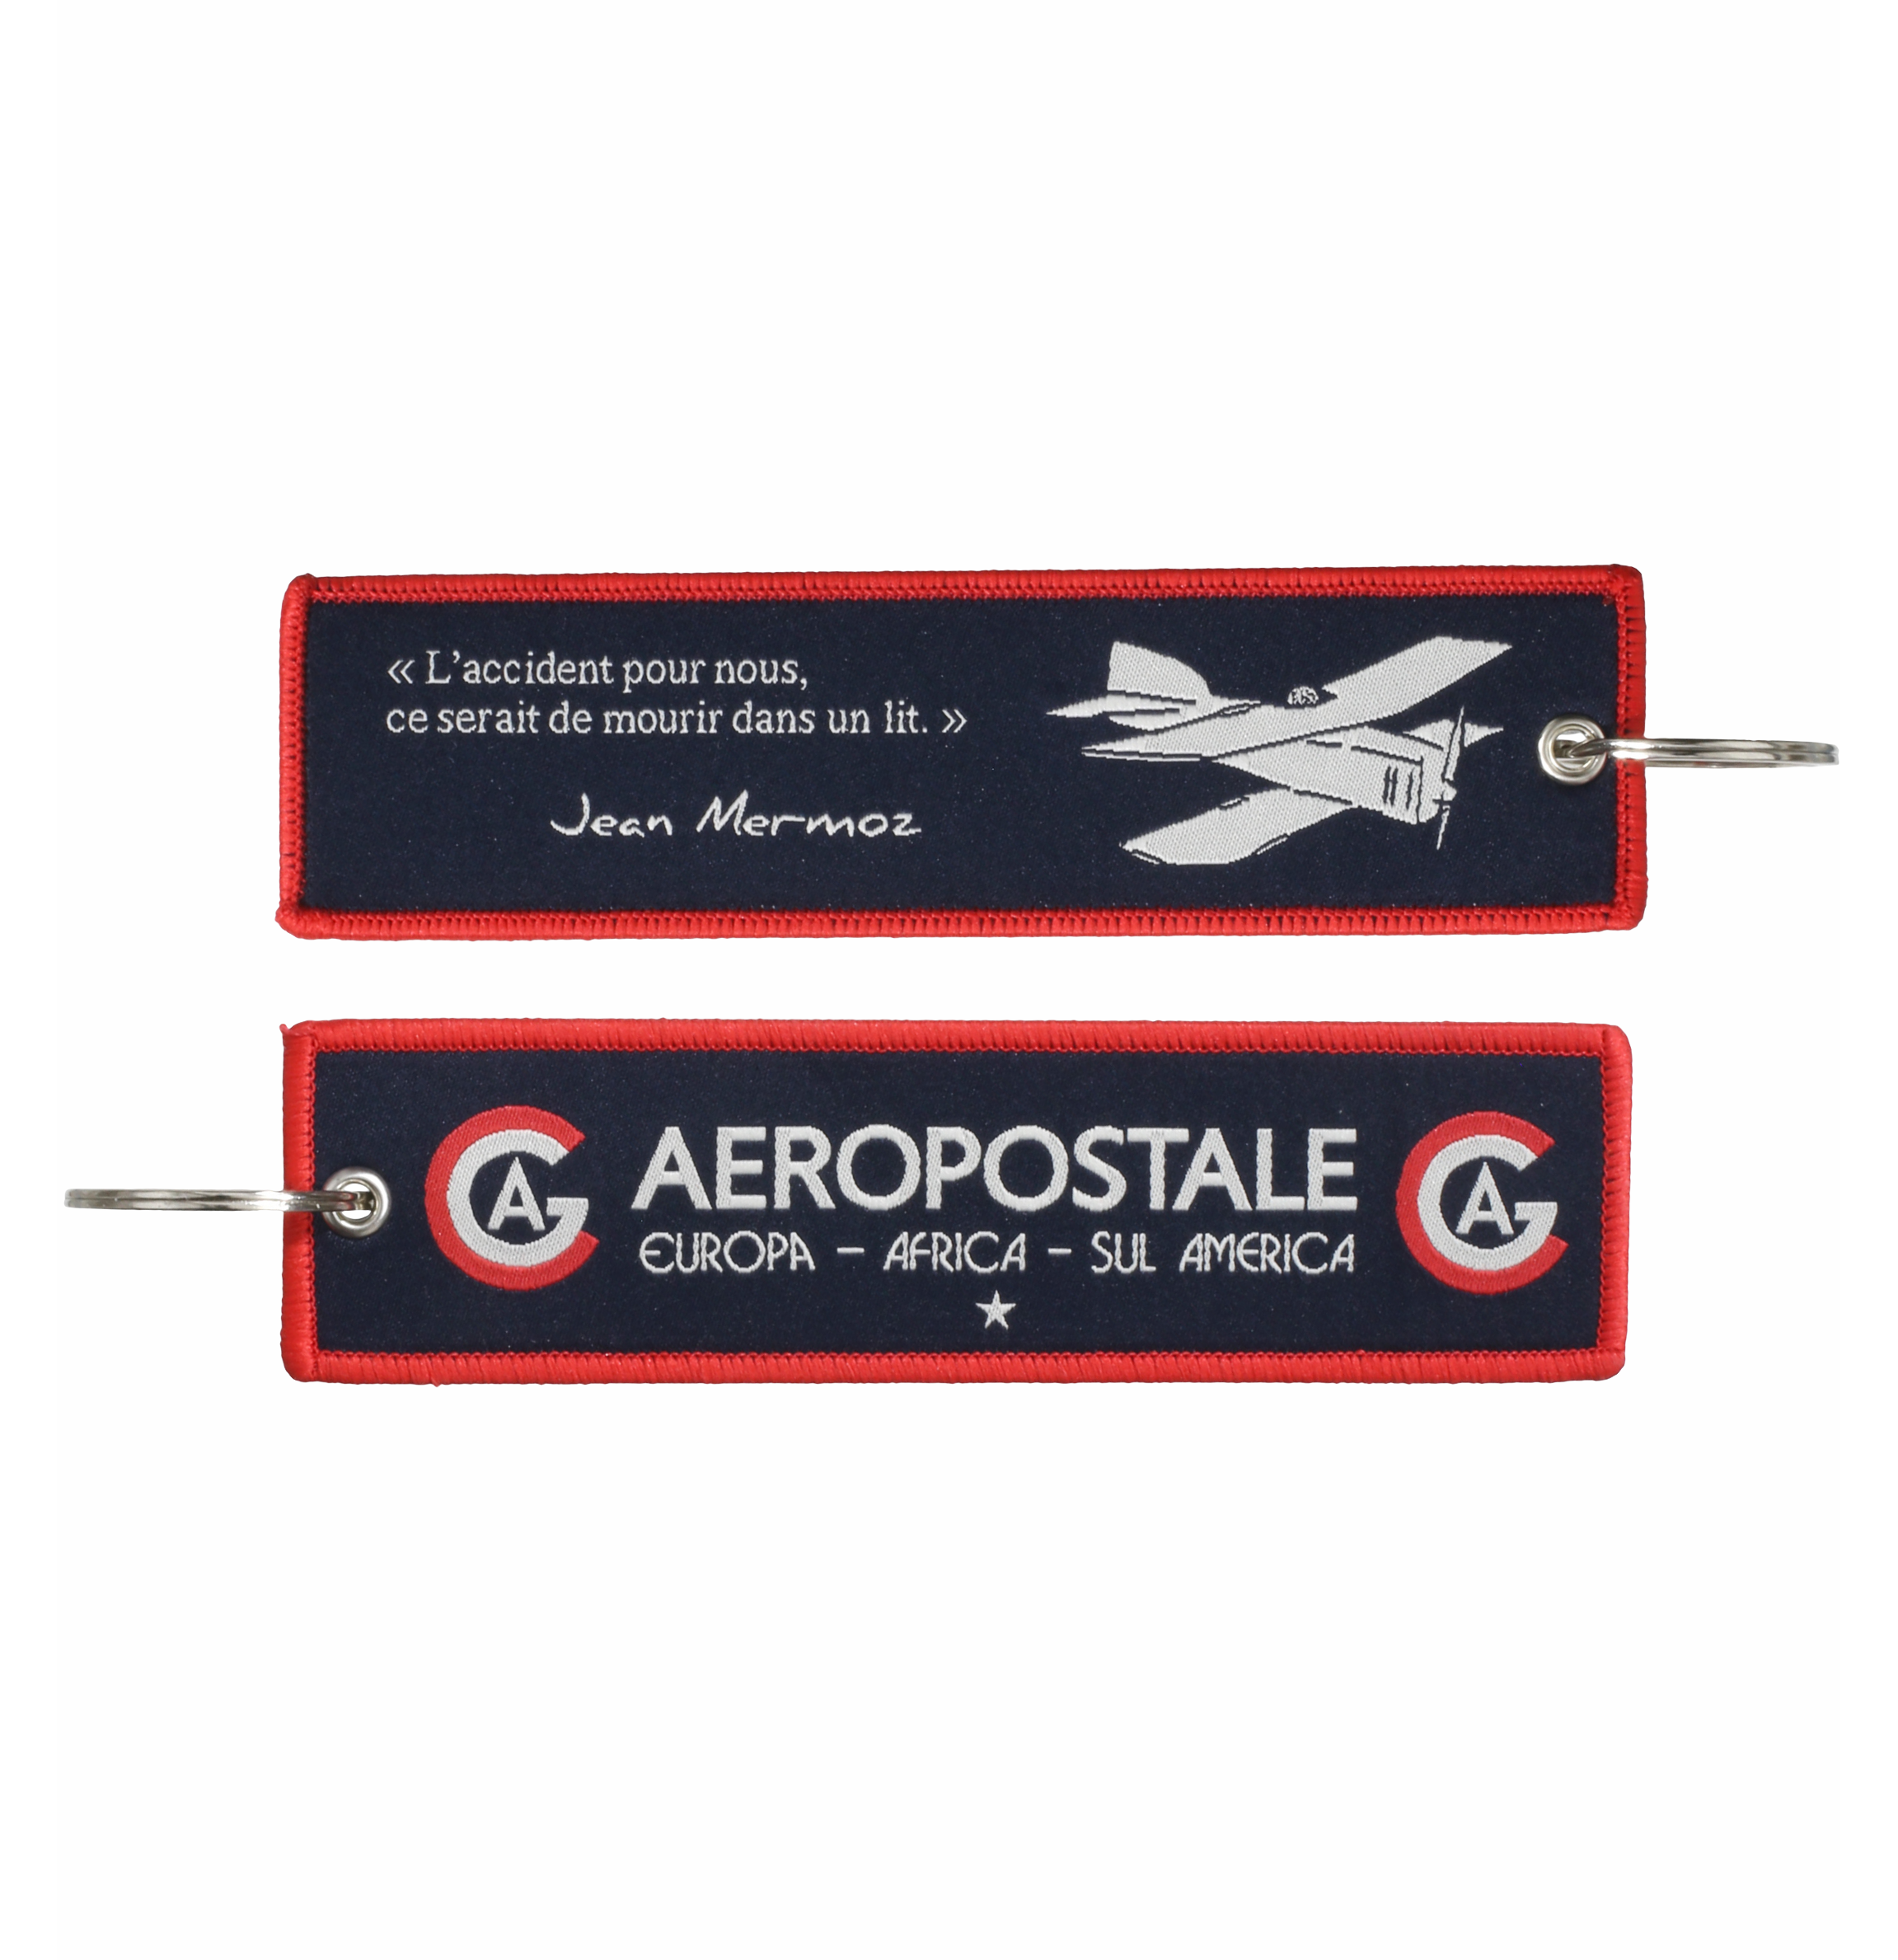 Air France Legend flame key ring Aéropostale Mermoz, the accident...